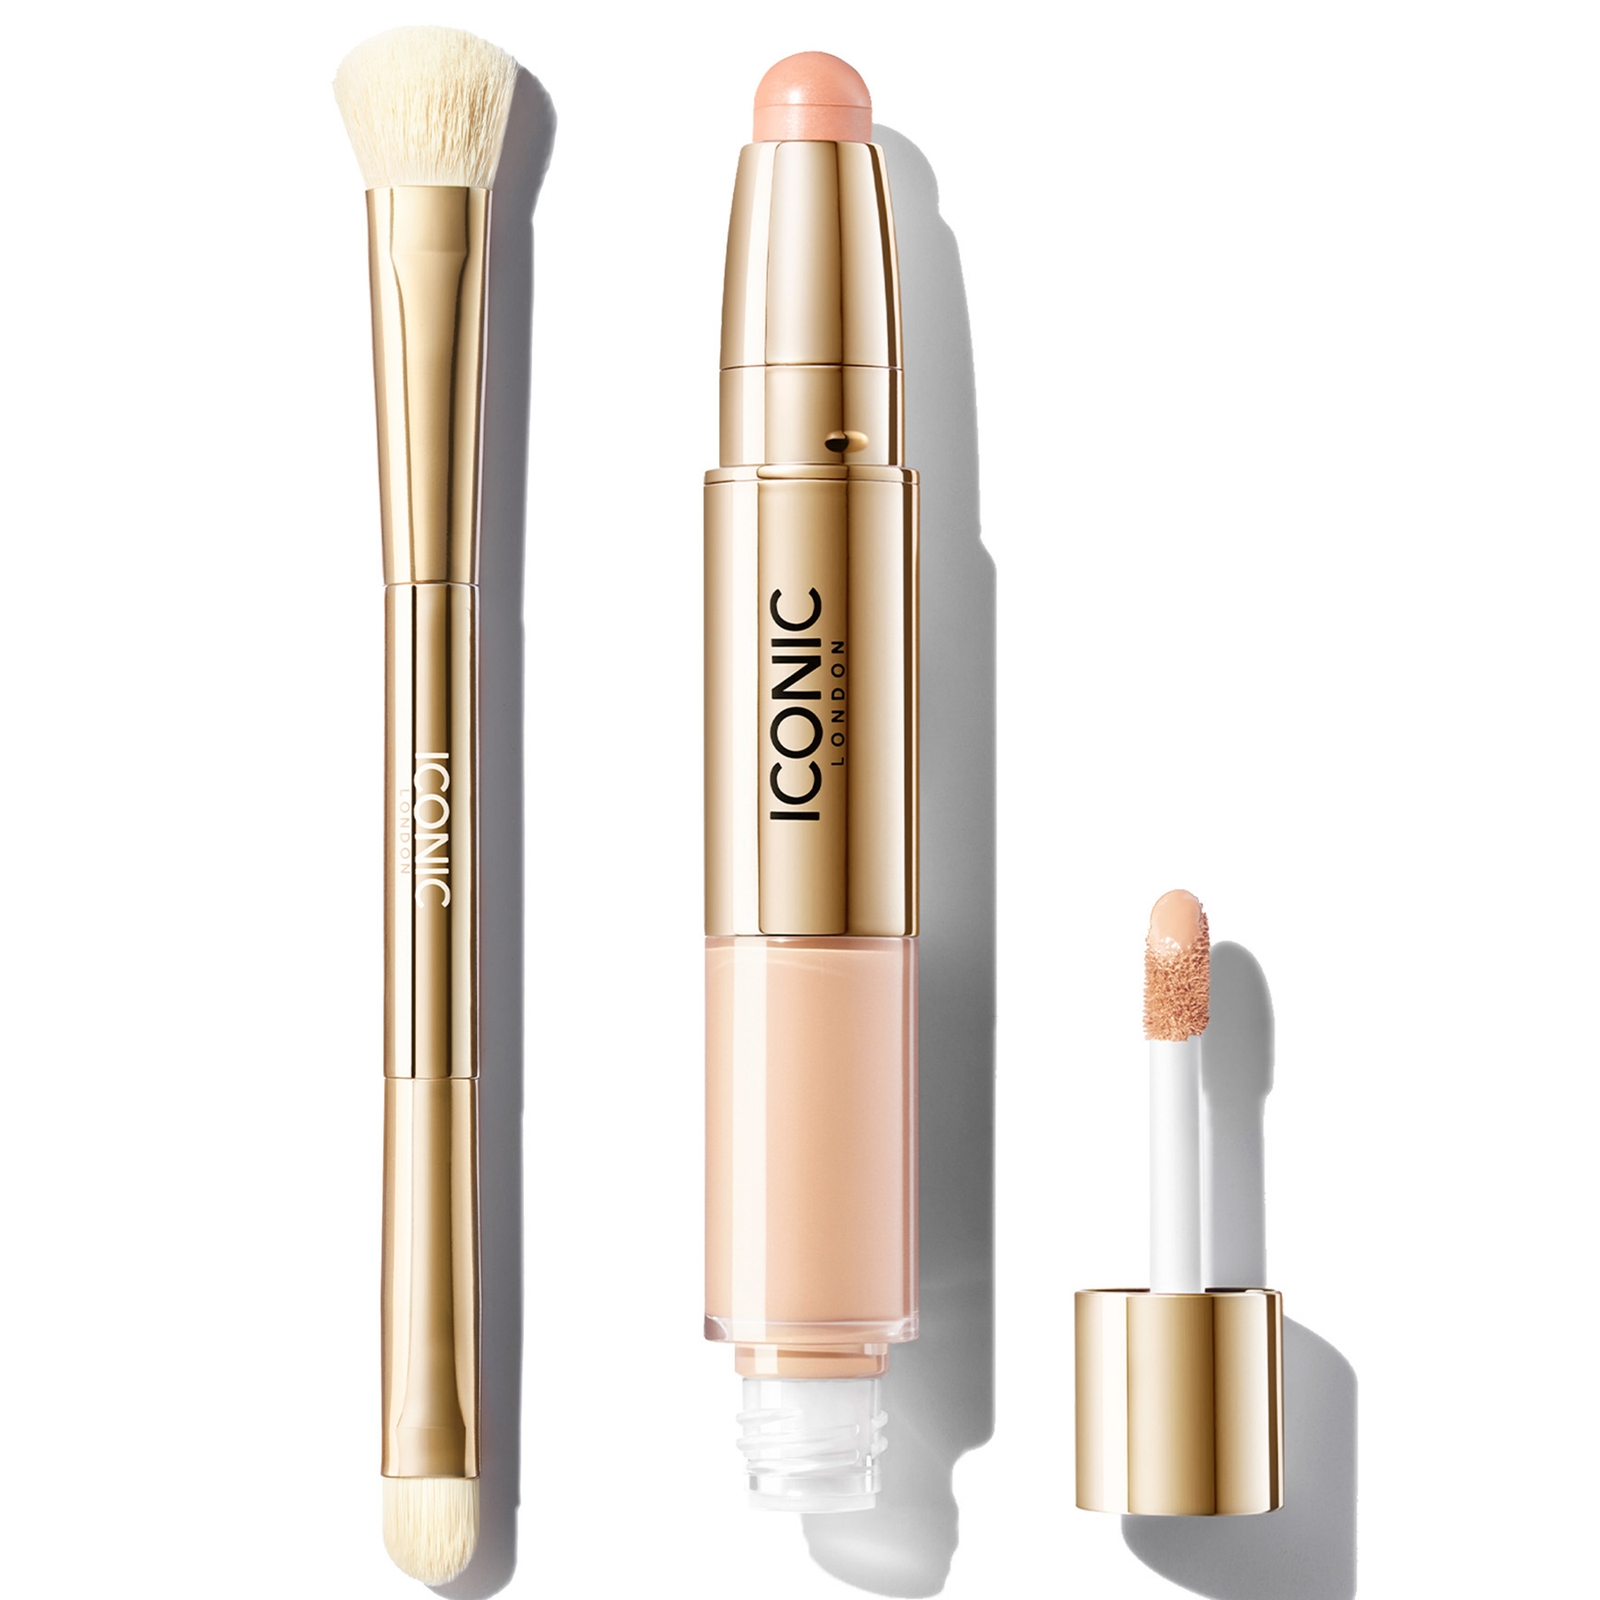 Iconic London Radiant Concealer And Brush Bundle (various Shades) - Neutral Fair